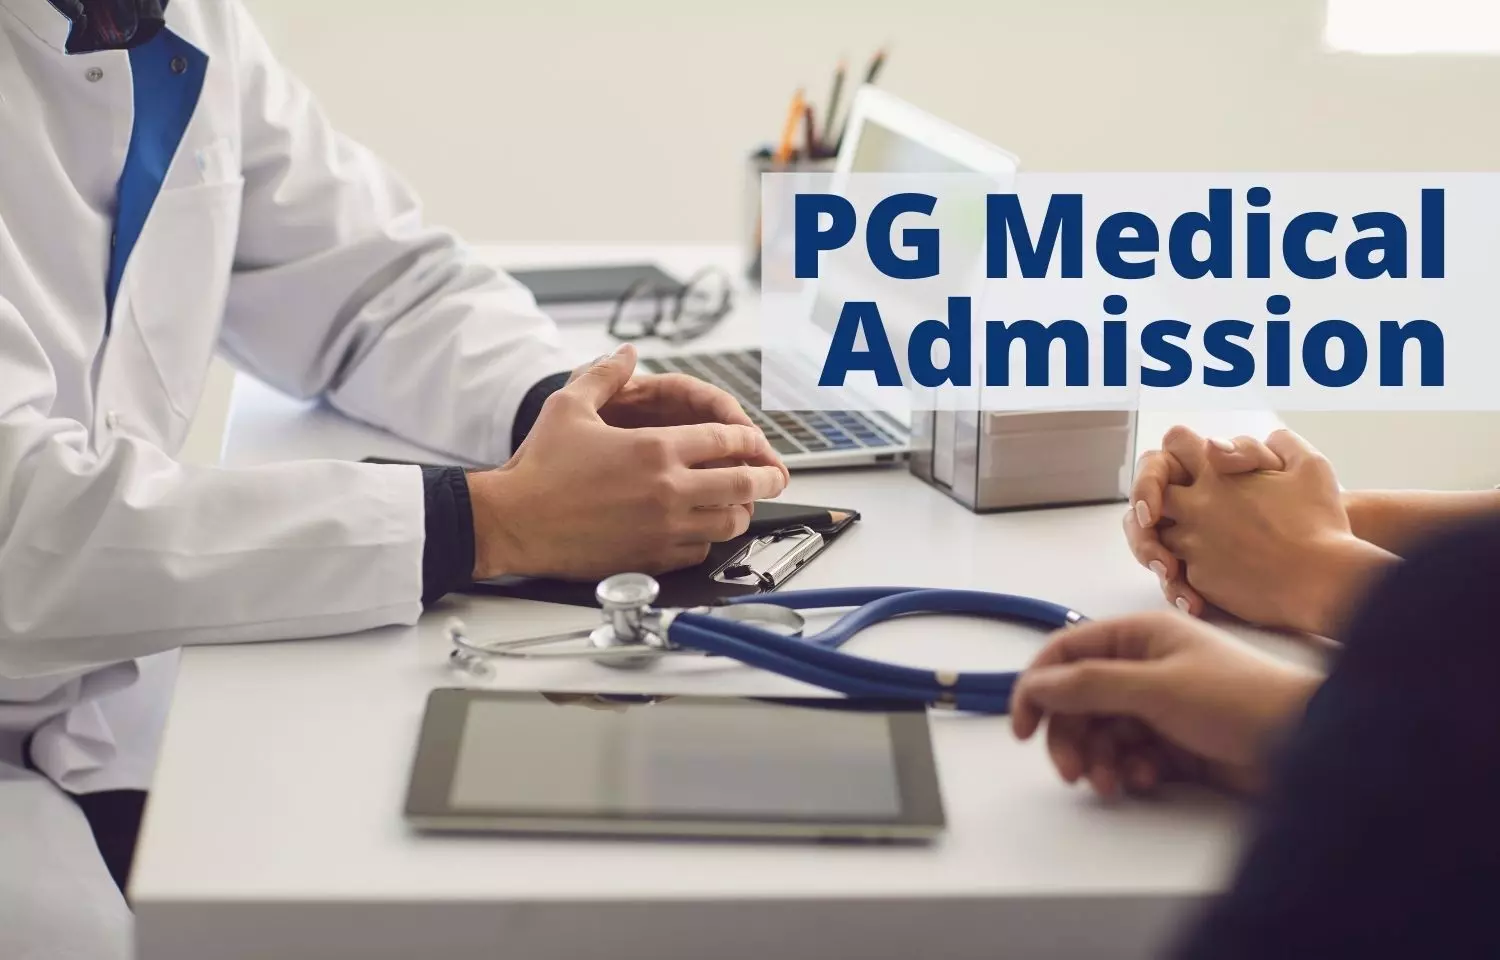 TN Health Issues Clarification for OCI, PIO Candidates seeking PG medical, dental admissions under Management Quota